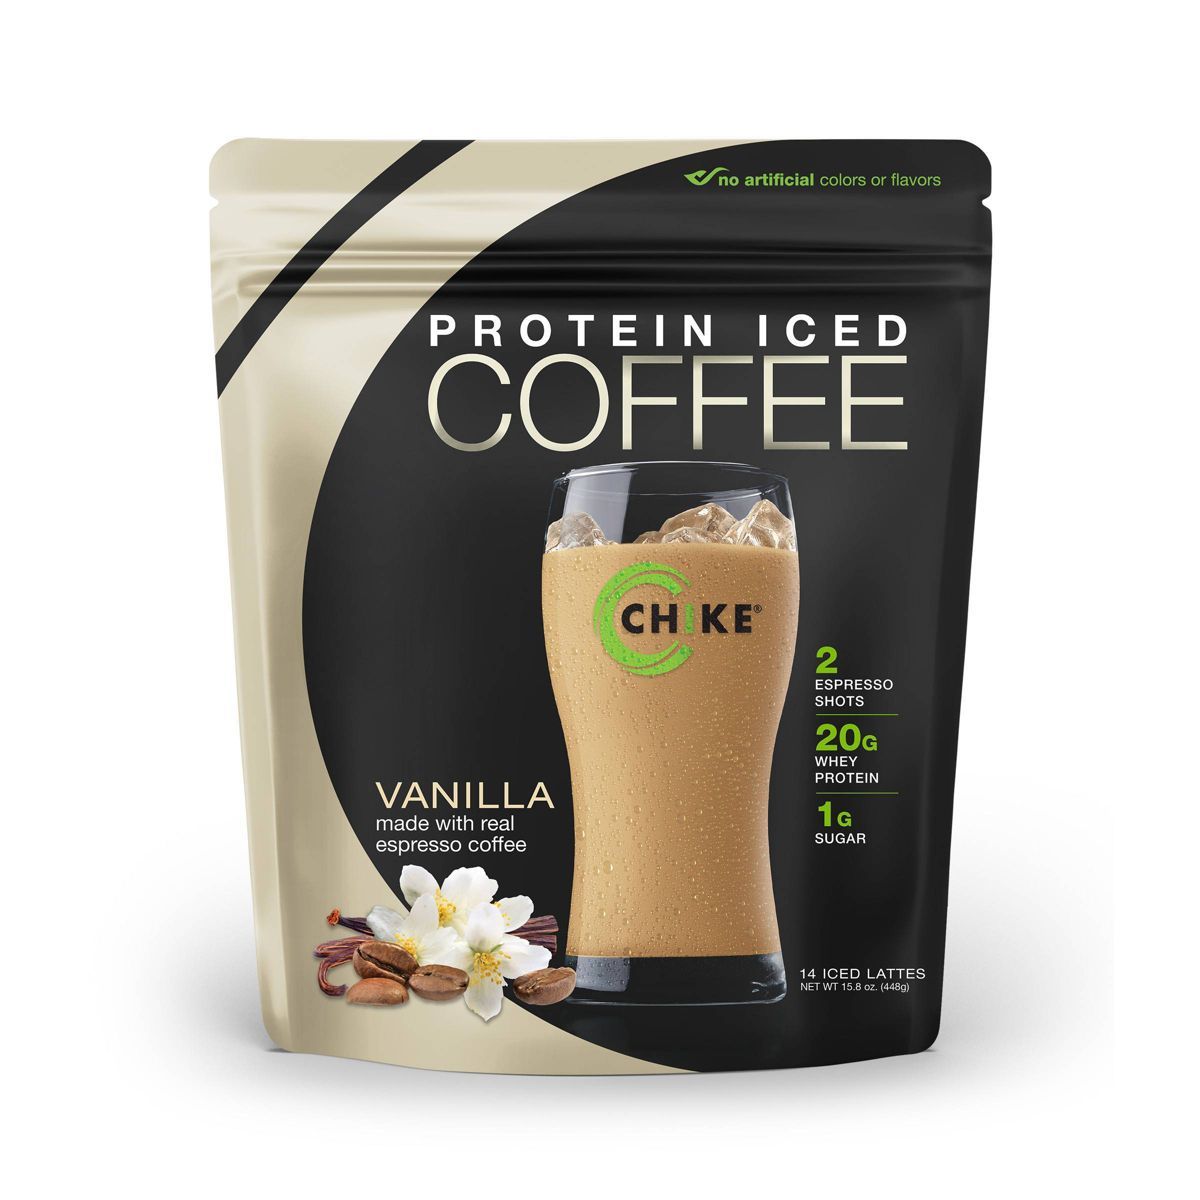 Chike Protein Iced Coffee - Vanilla - 15.8oz (Bag) | Target